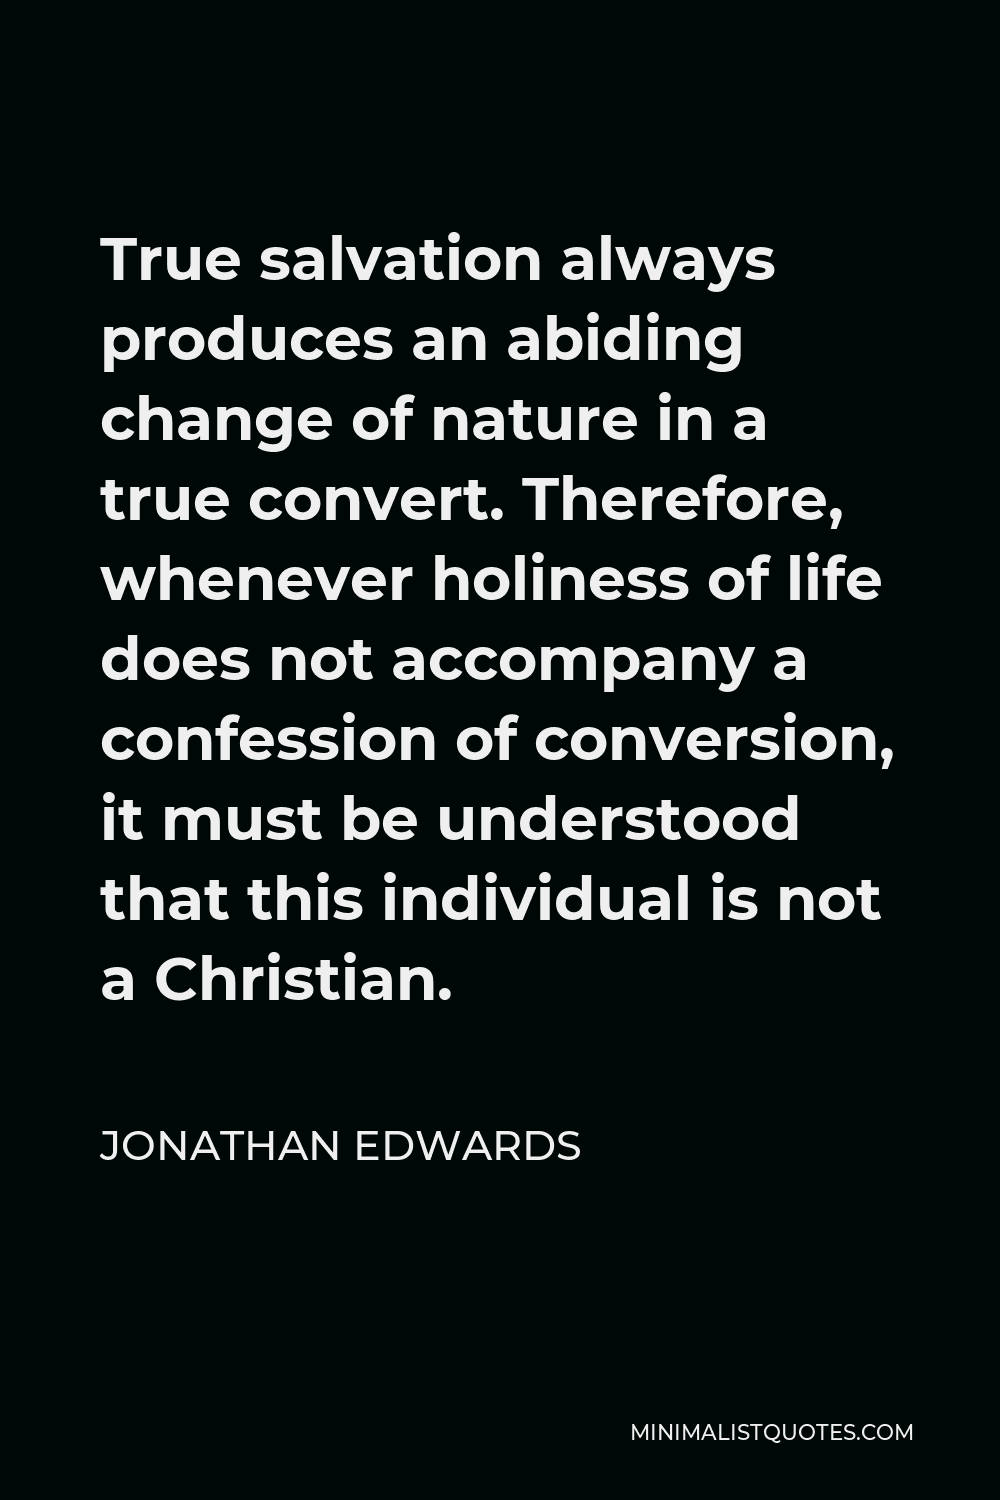 Jonathan Edwards Quote - True salvation always produces an abiding change of nature in a true convert. Therefore, whenever holiness of life does not accompany a confession of conversion, it must be understood that this individual is not a Christian.